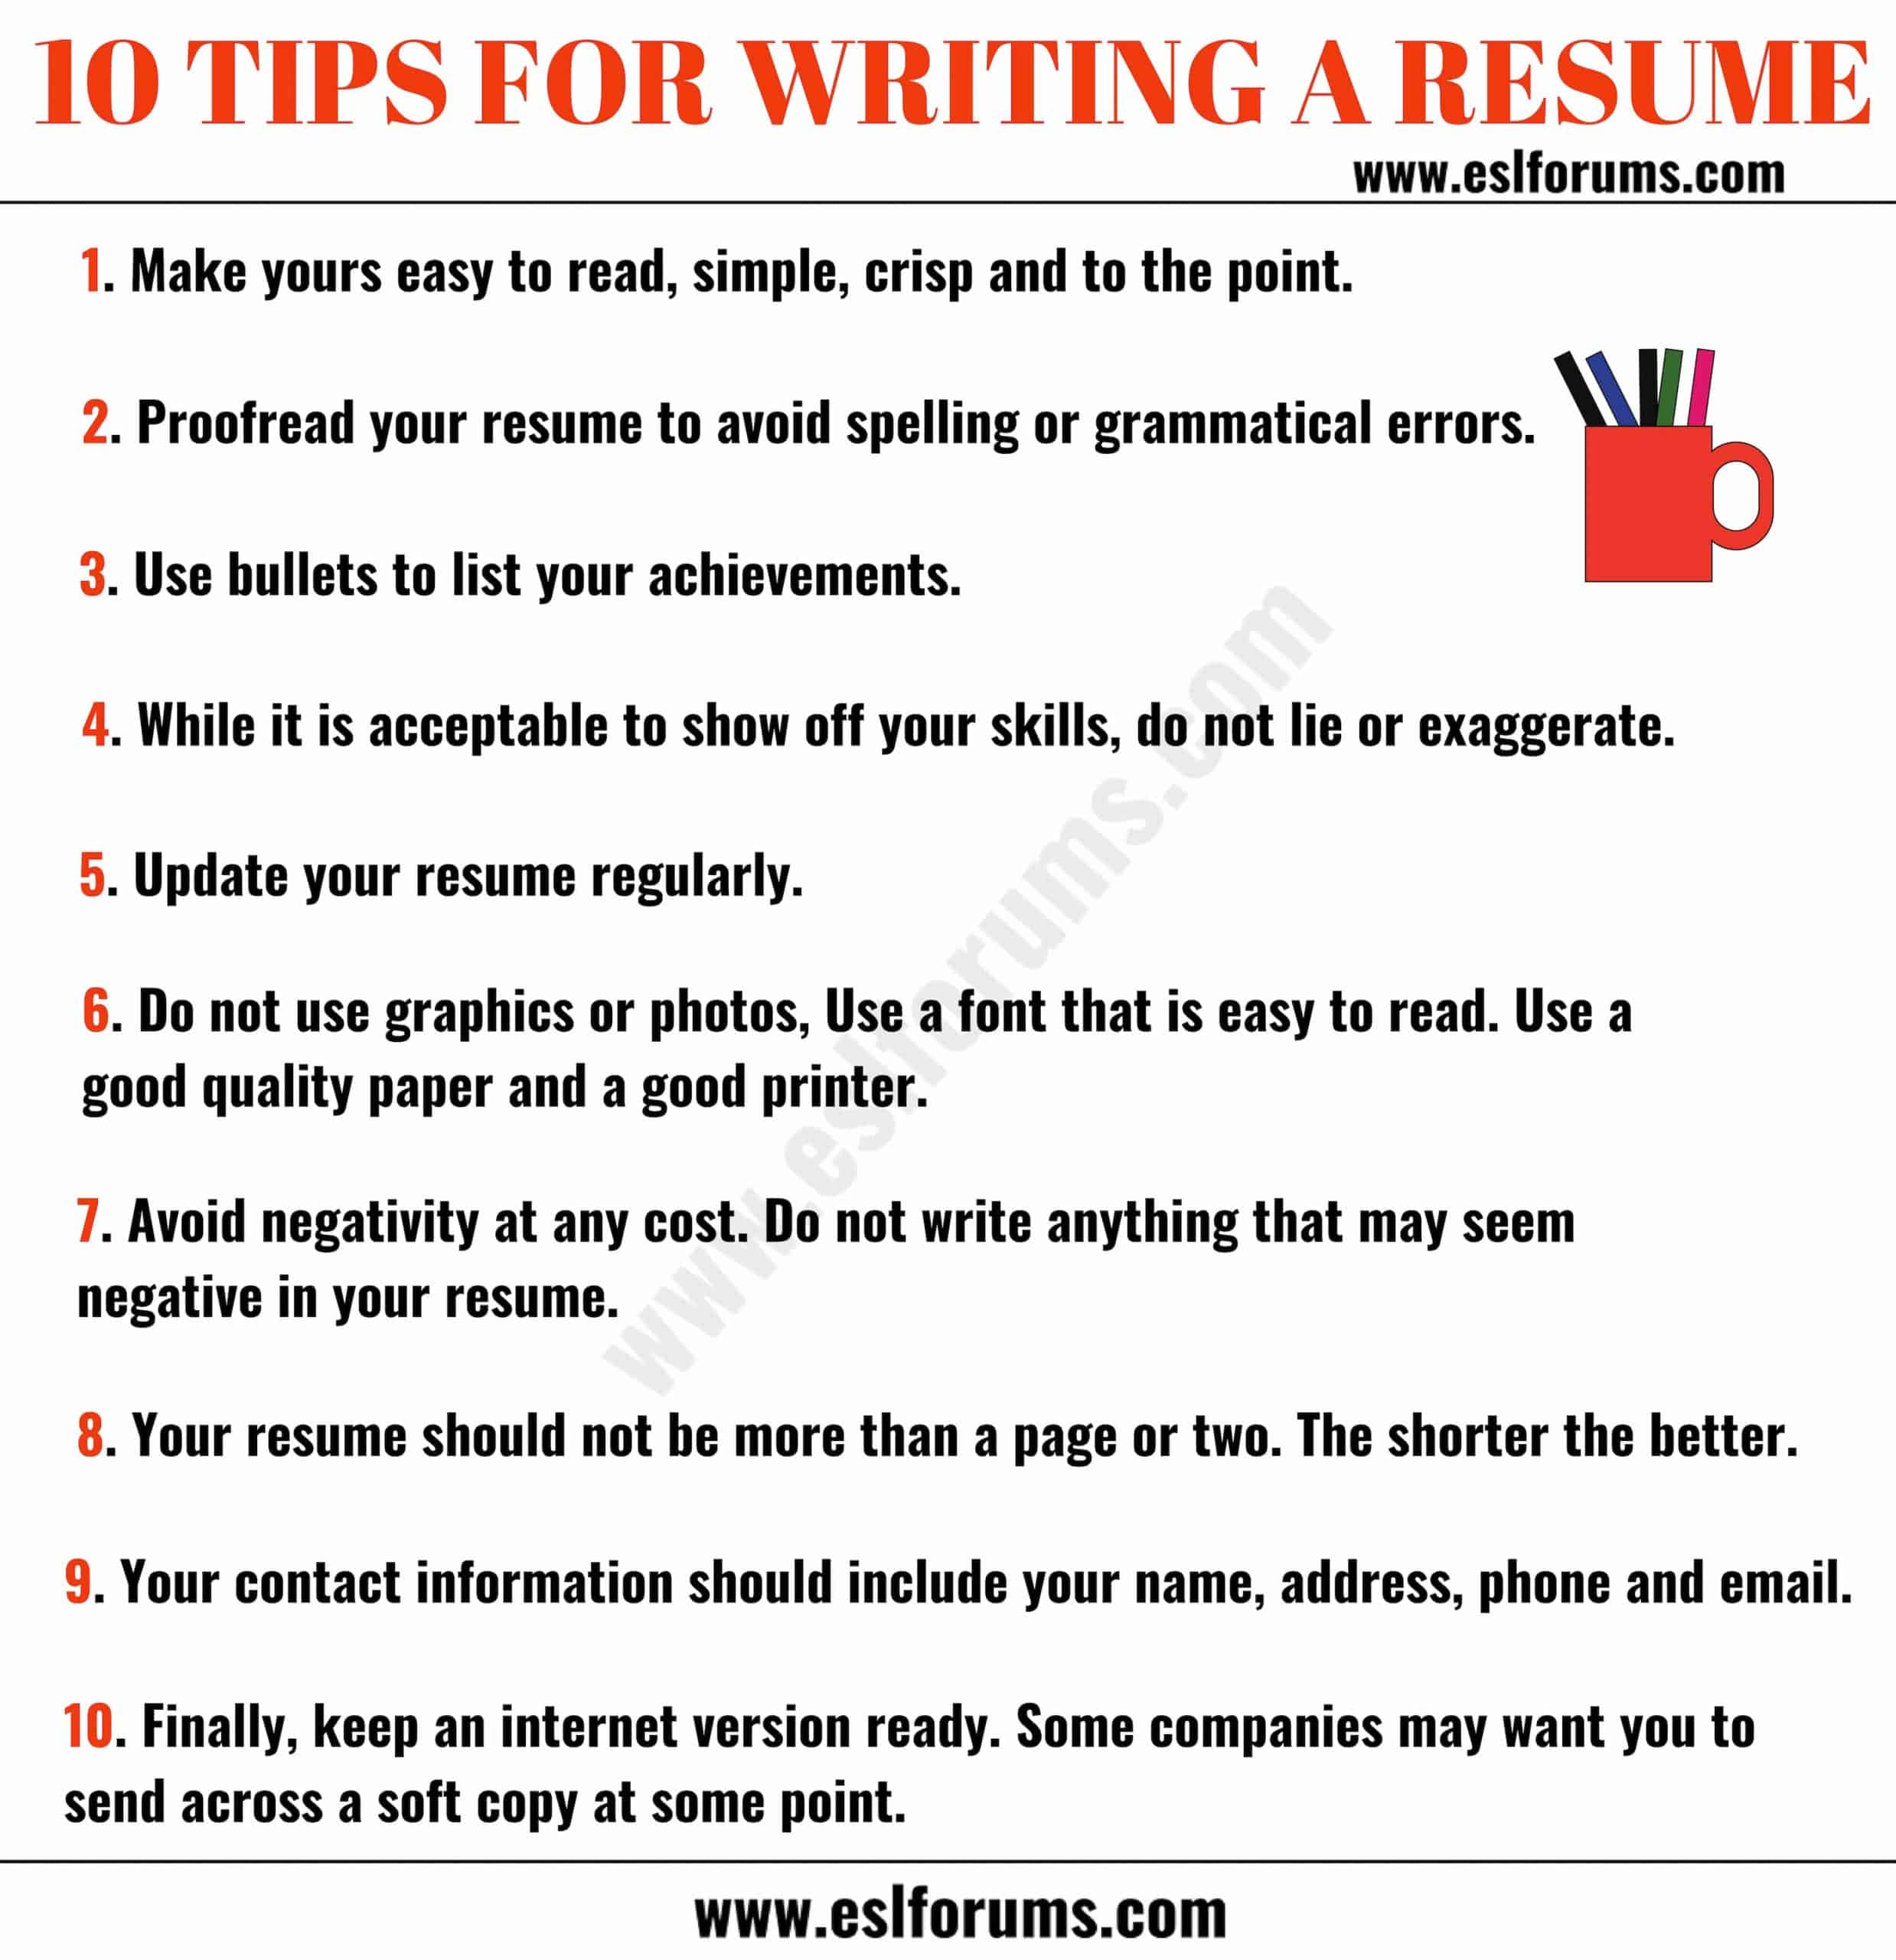 Resume Tips: How to Write a Professional Resume